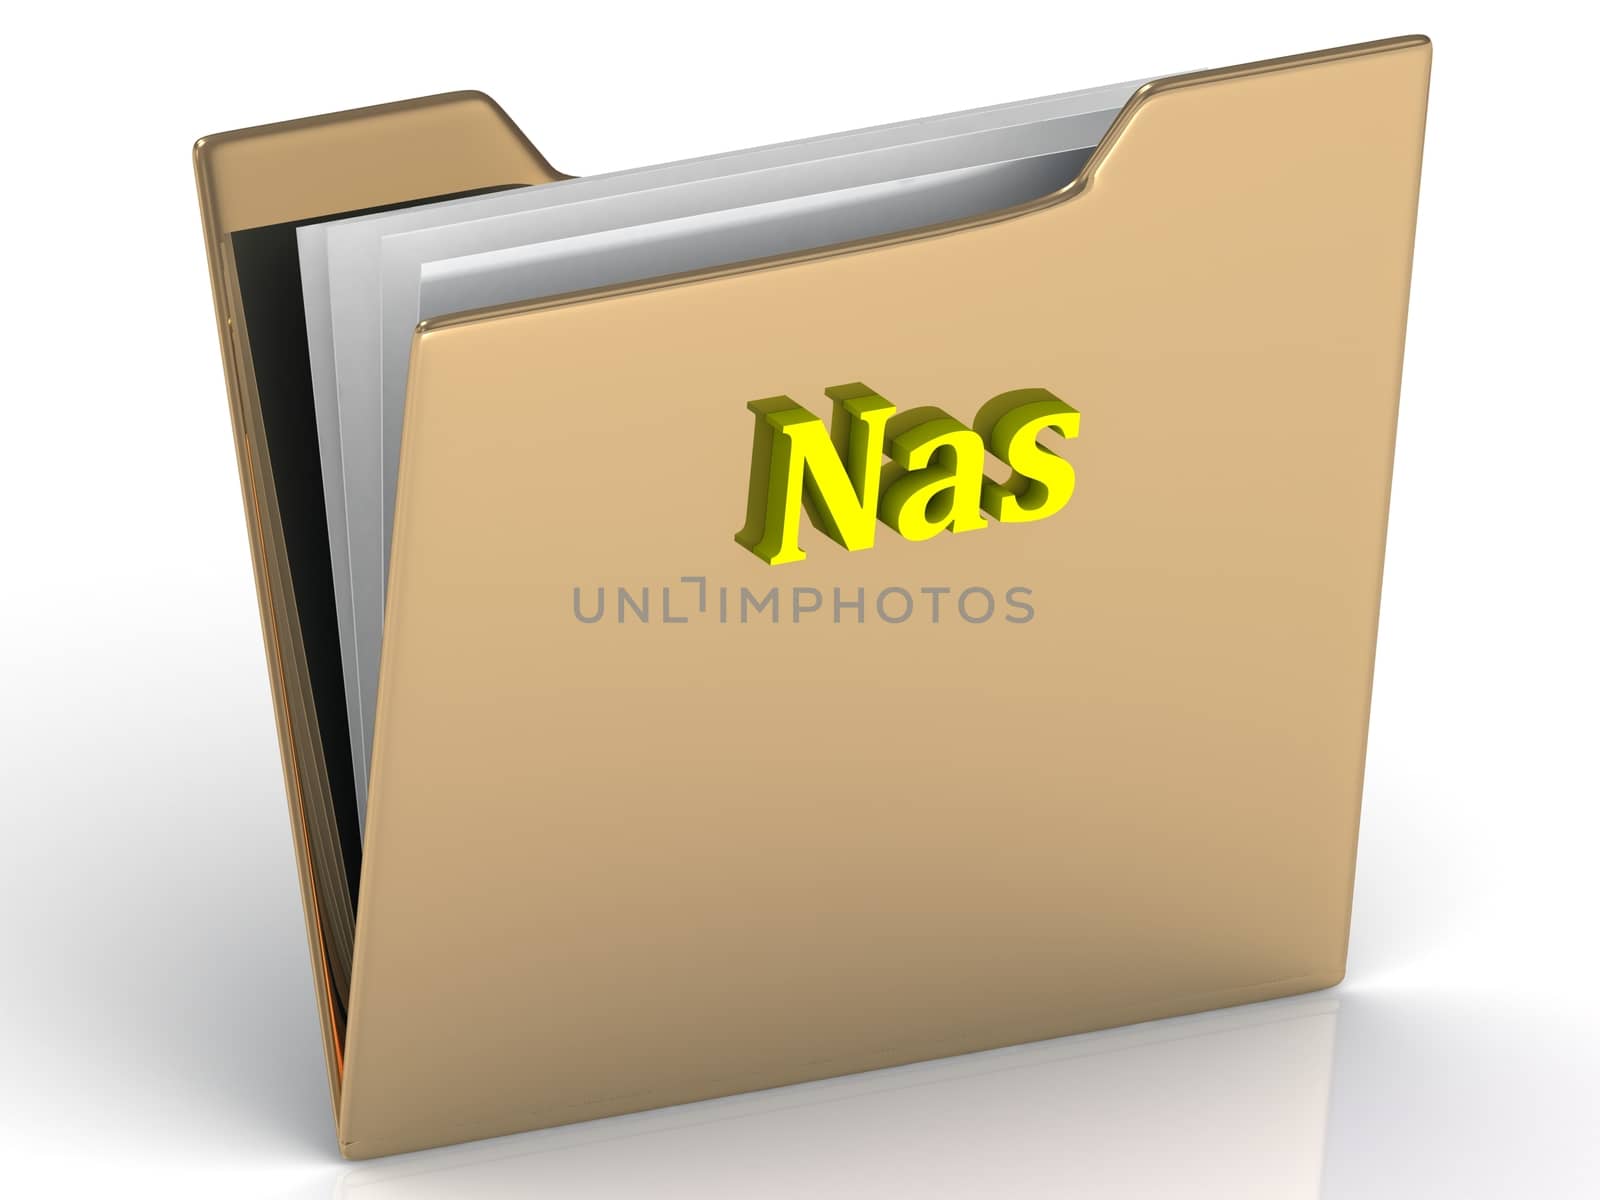 Nas- bright color letters on a gold folder on a white background